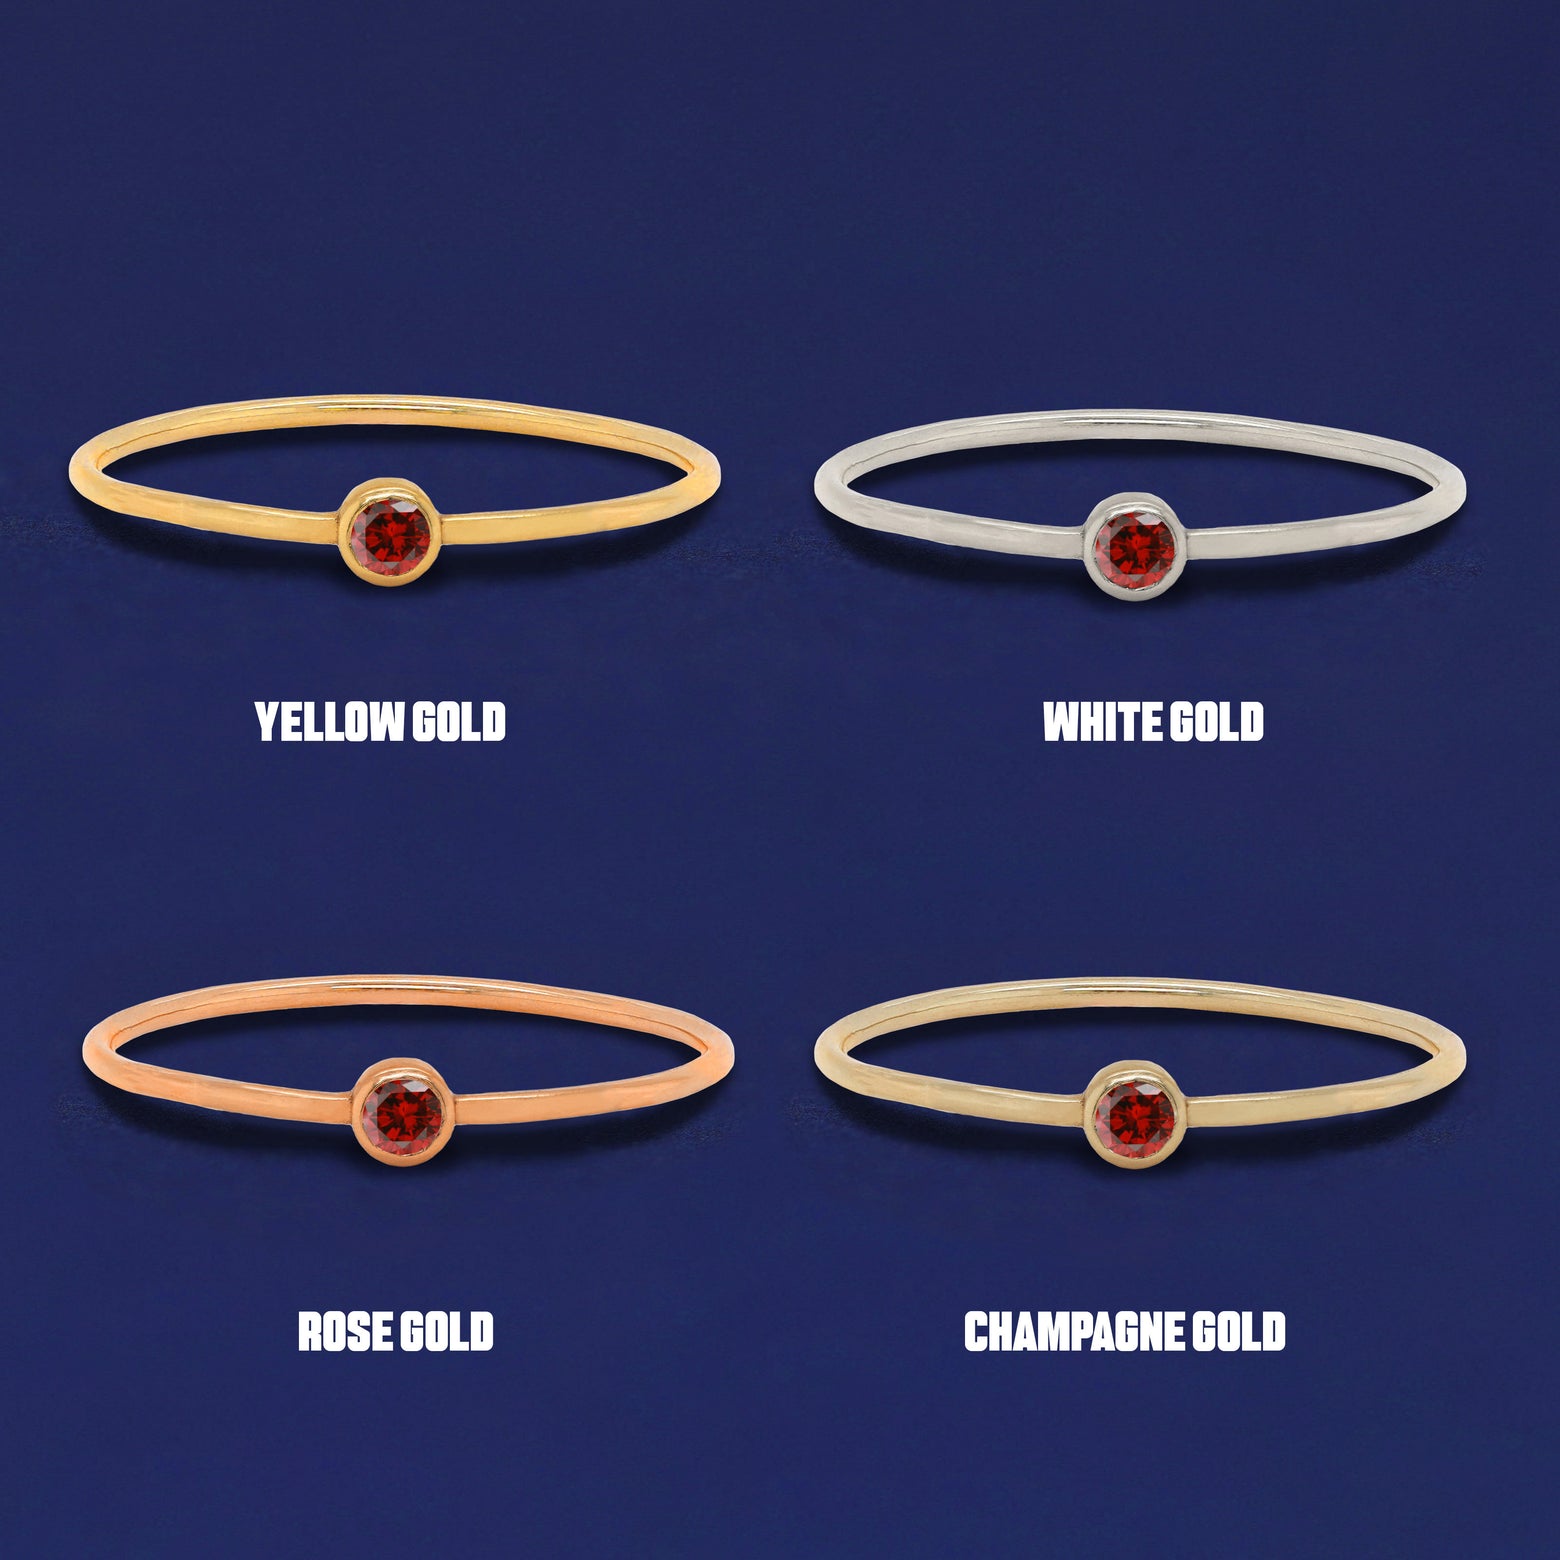 Four versions of the Garnet Ring shown in options of yellow, white, rose and champagne gold